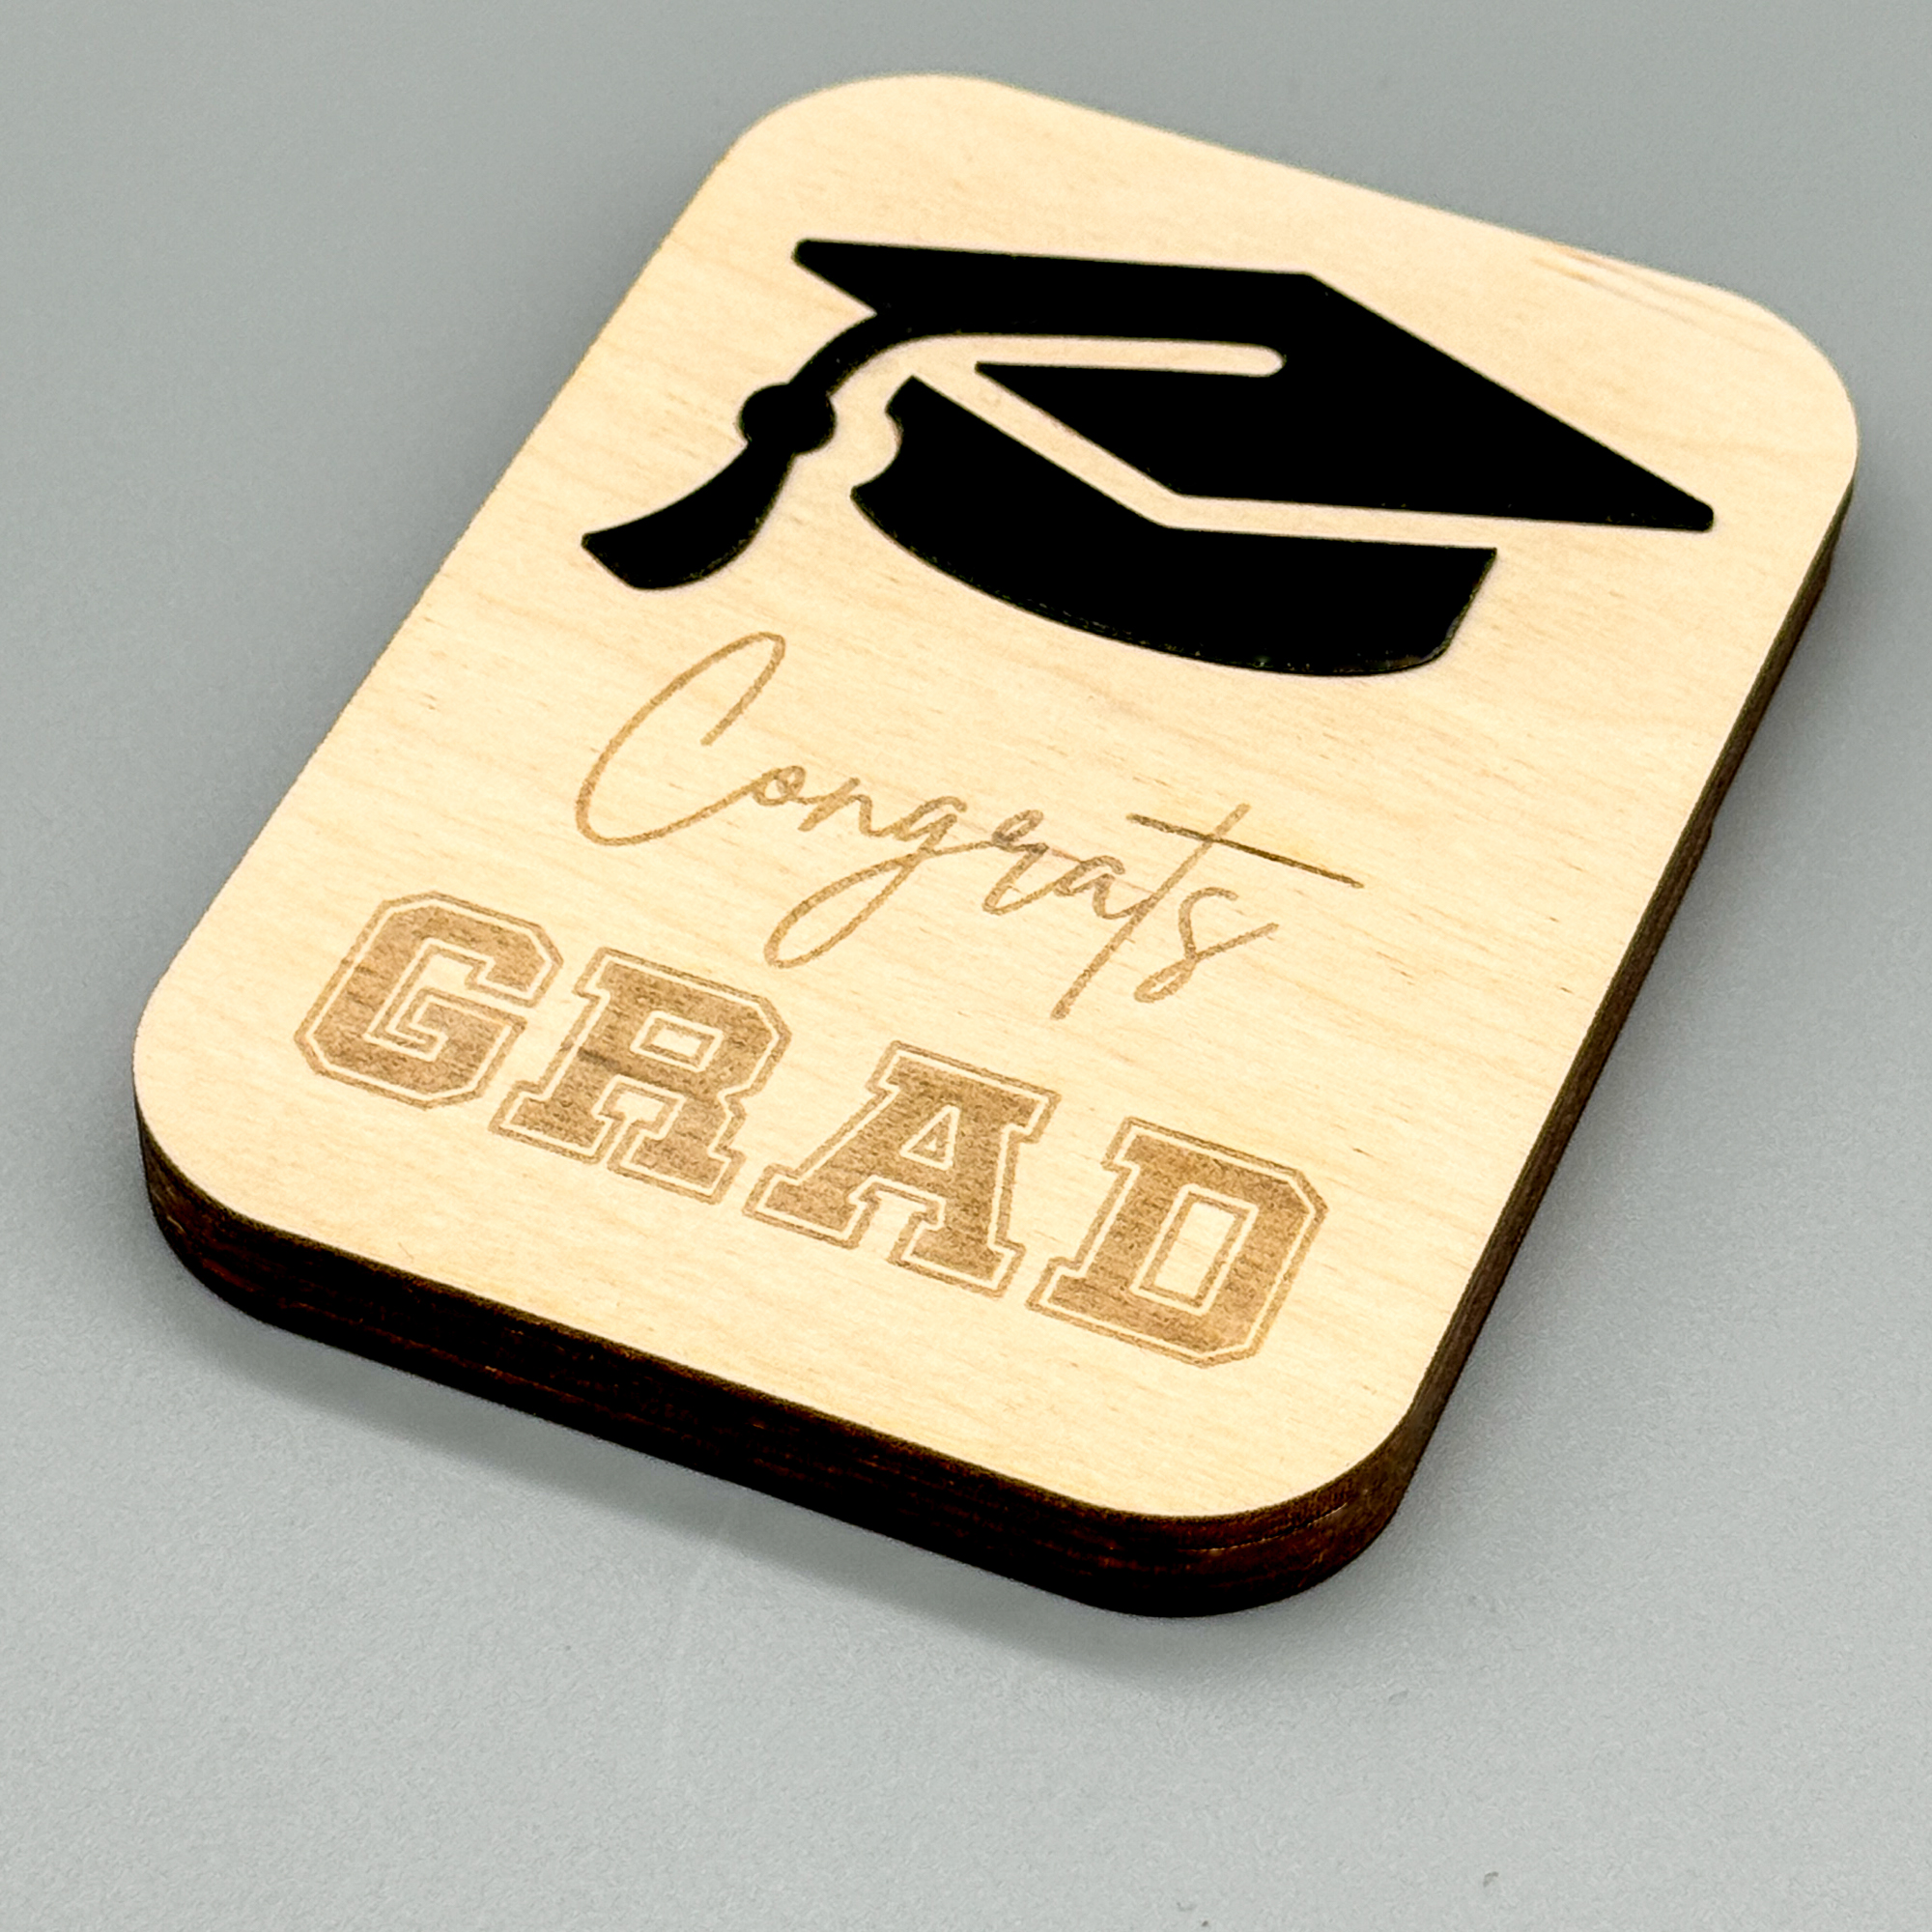 laser cut DIY gift card holder with black cap and "Congrats Grad" engraved on front